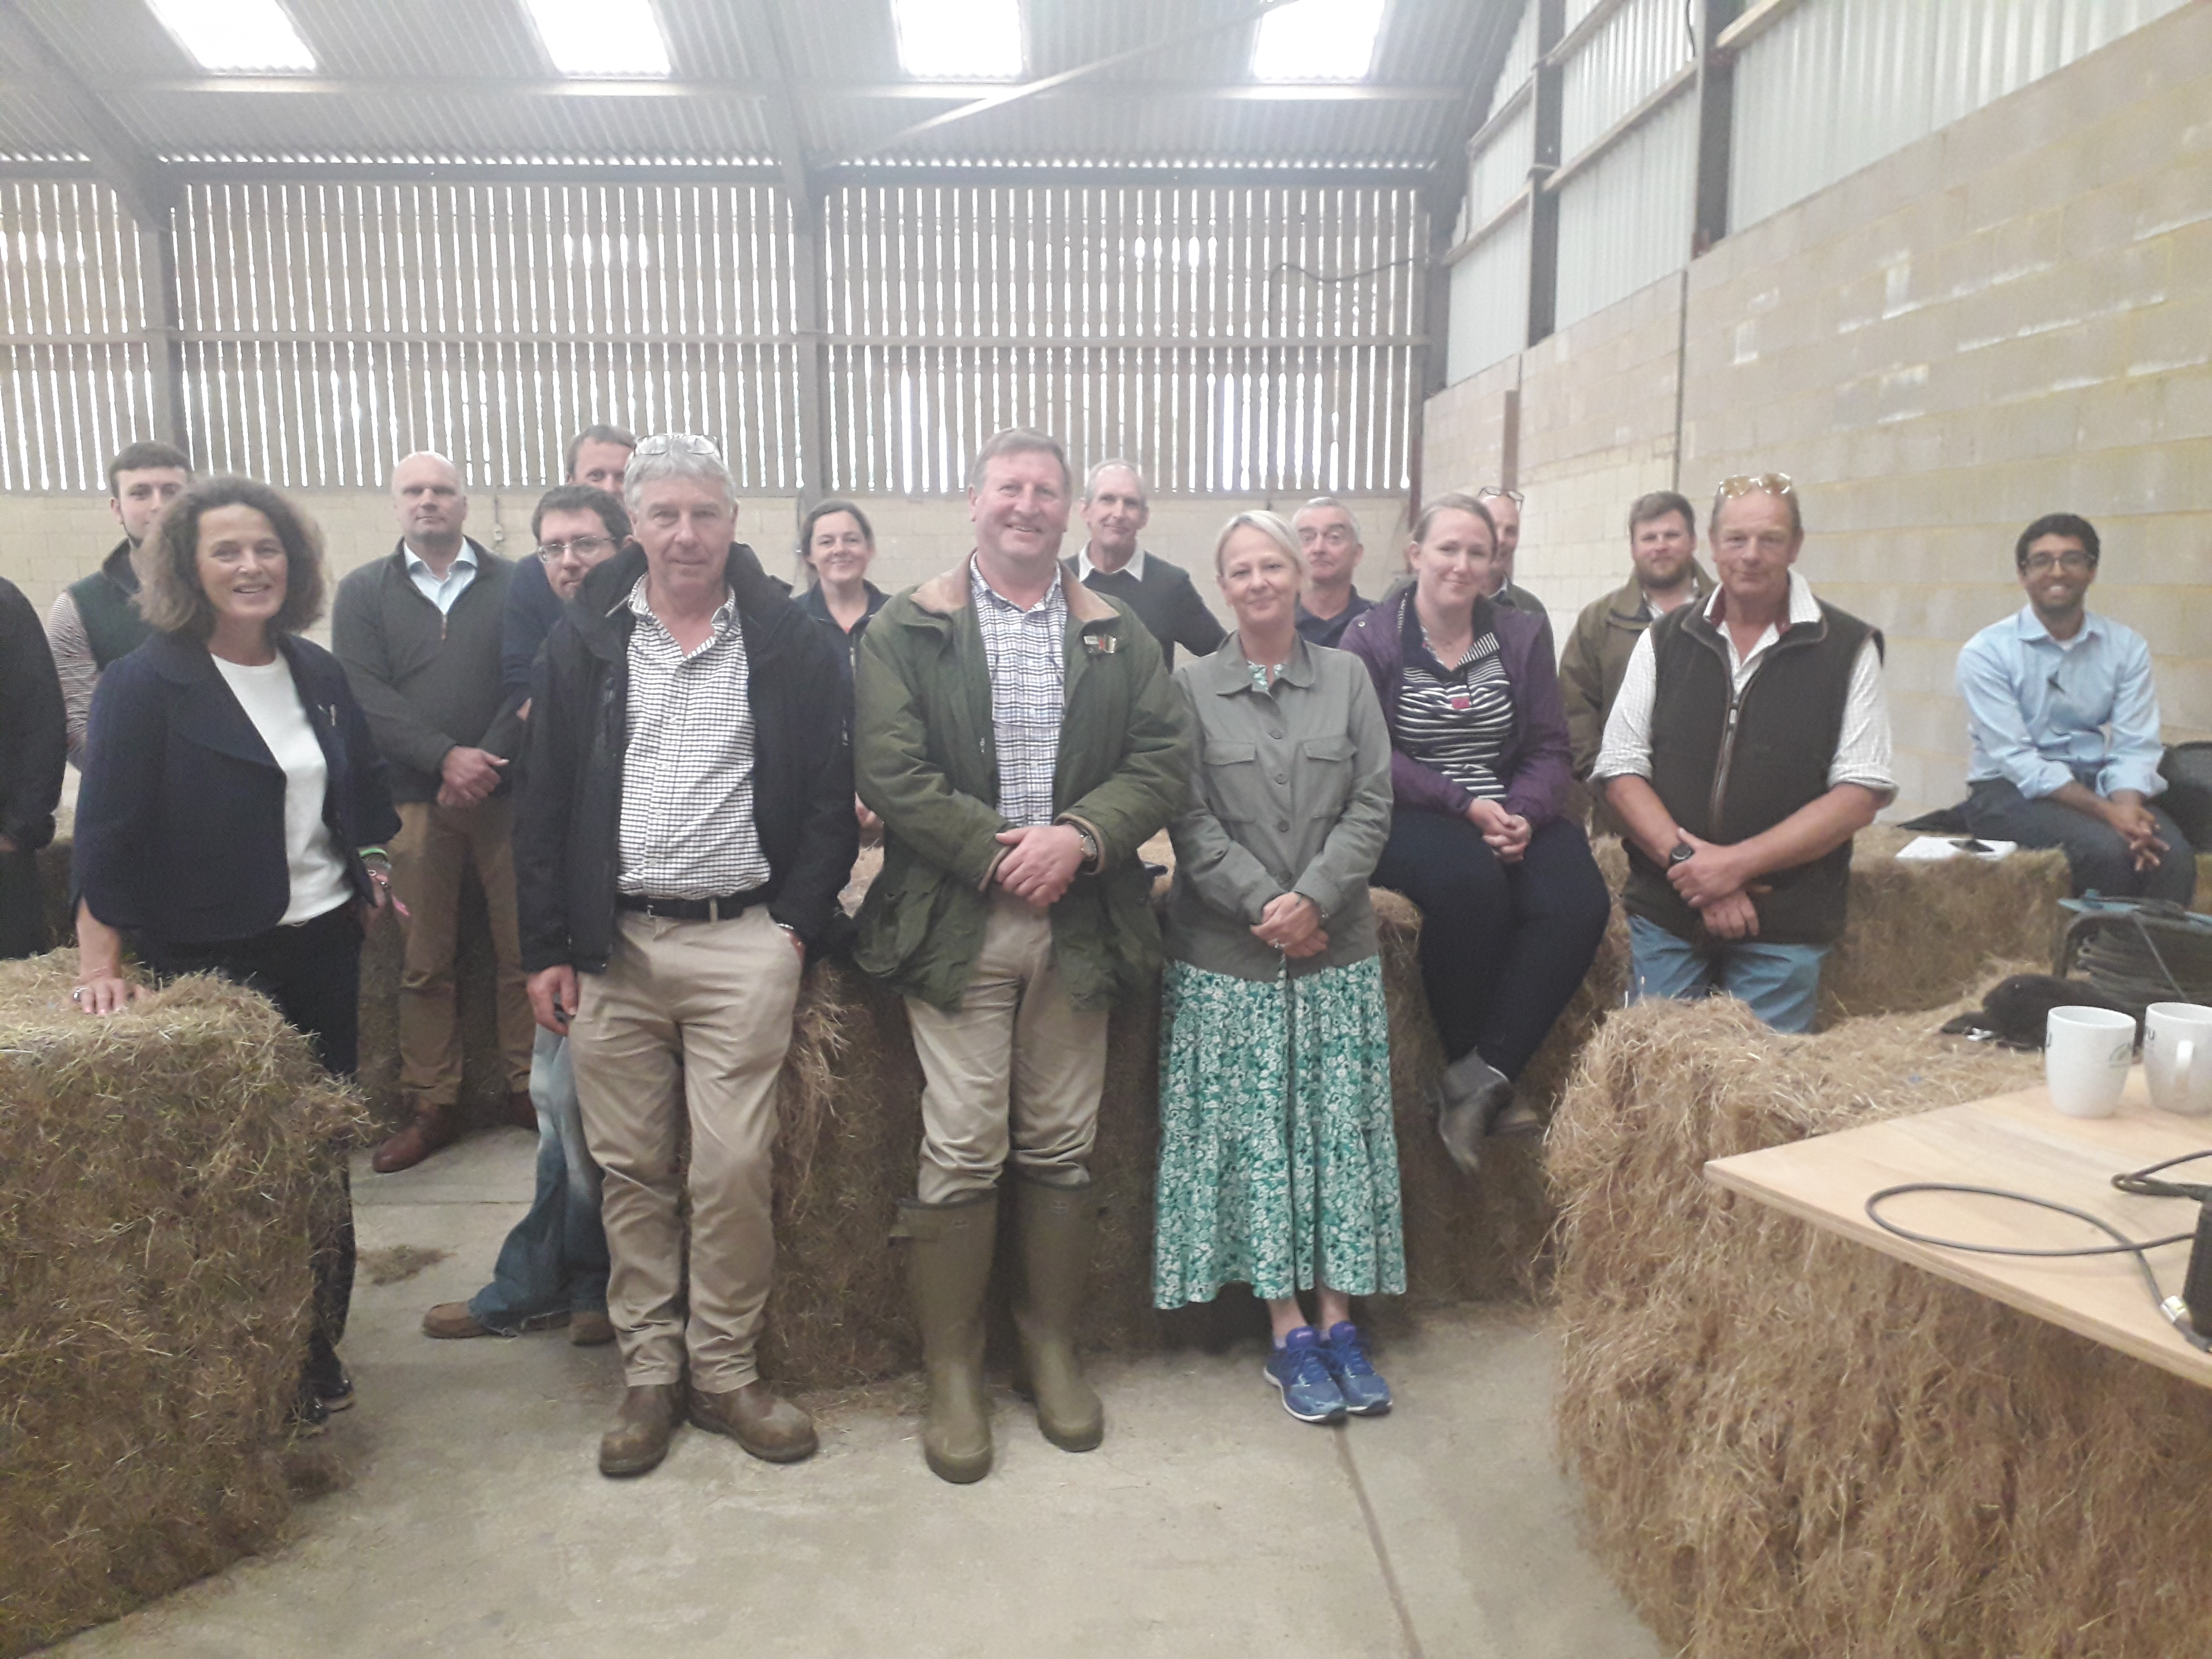 Tenant farmers meet Baroness Kate Rock - SE tenants' representaive John Marland is pictured centre.